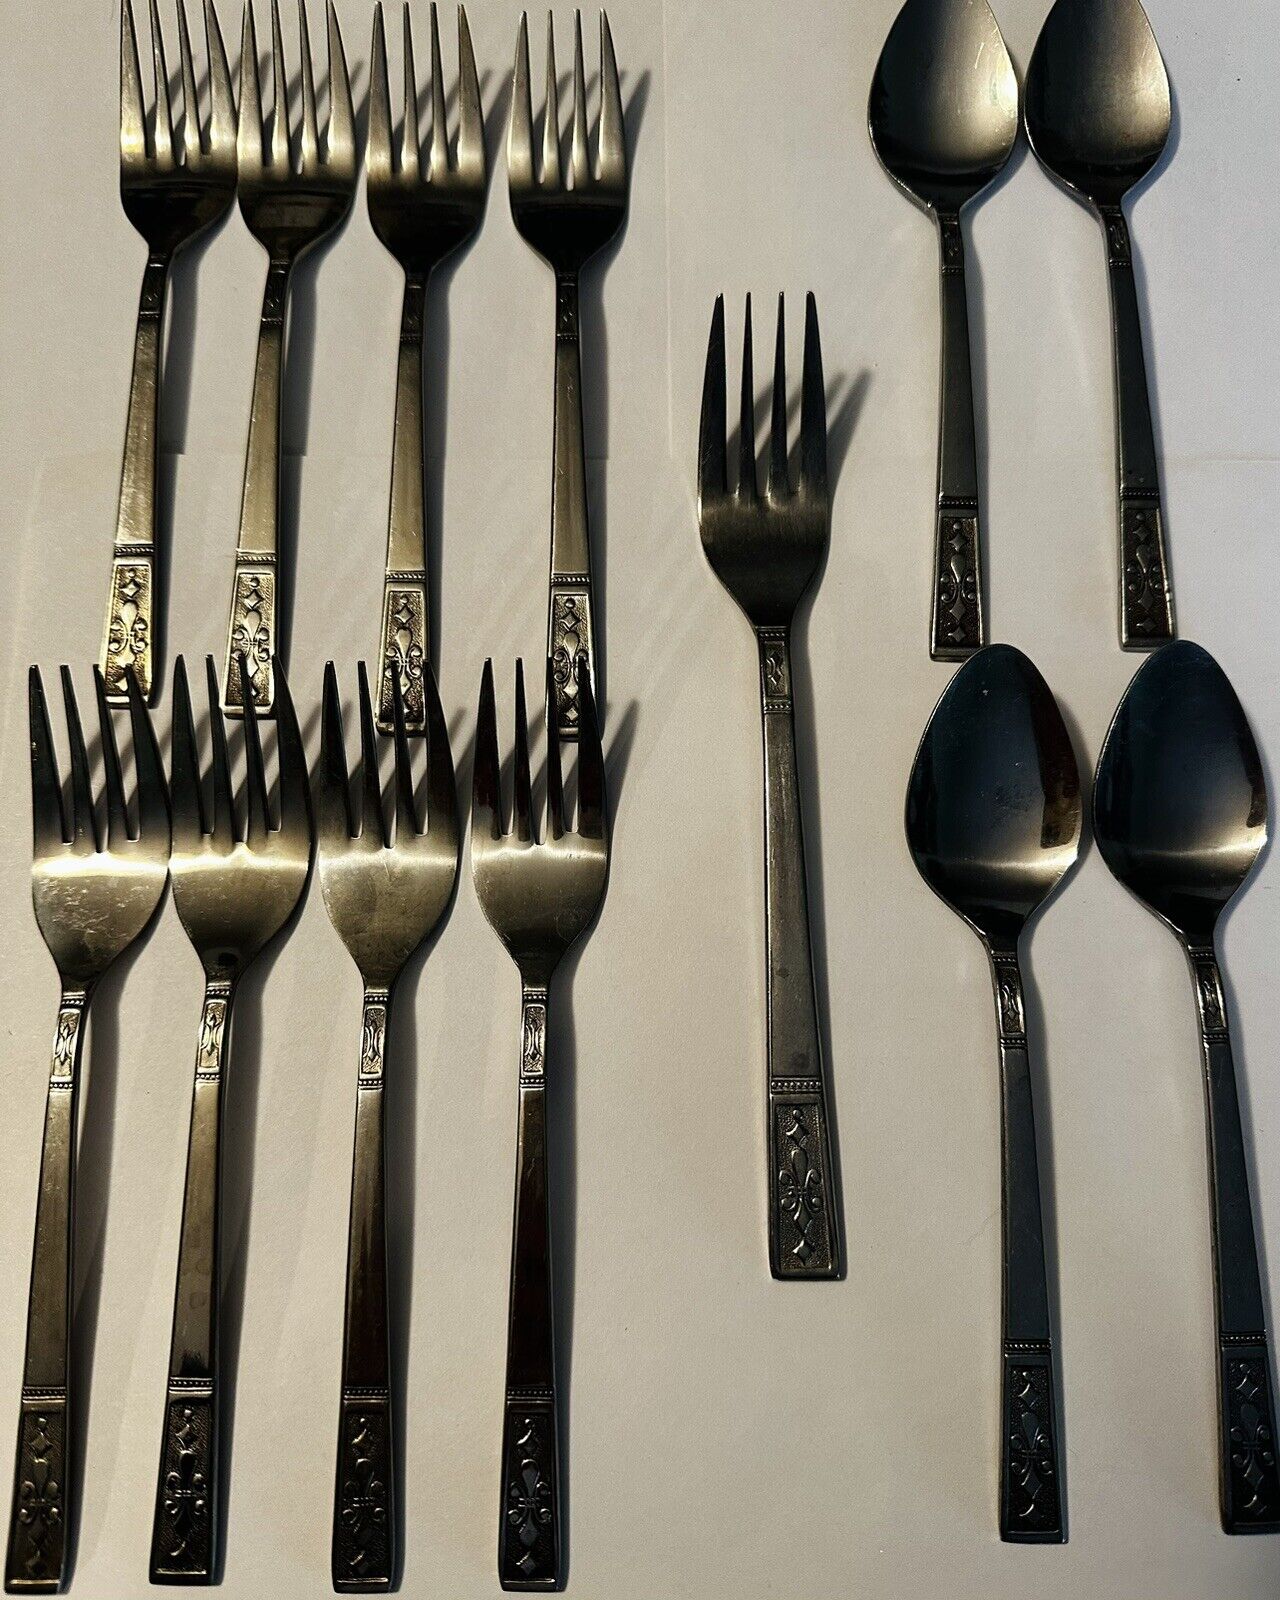 Interpur Cortina Stainless Steel Flatware Japan 13 Pc Mixed Lot Spoons Forks